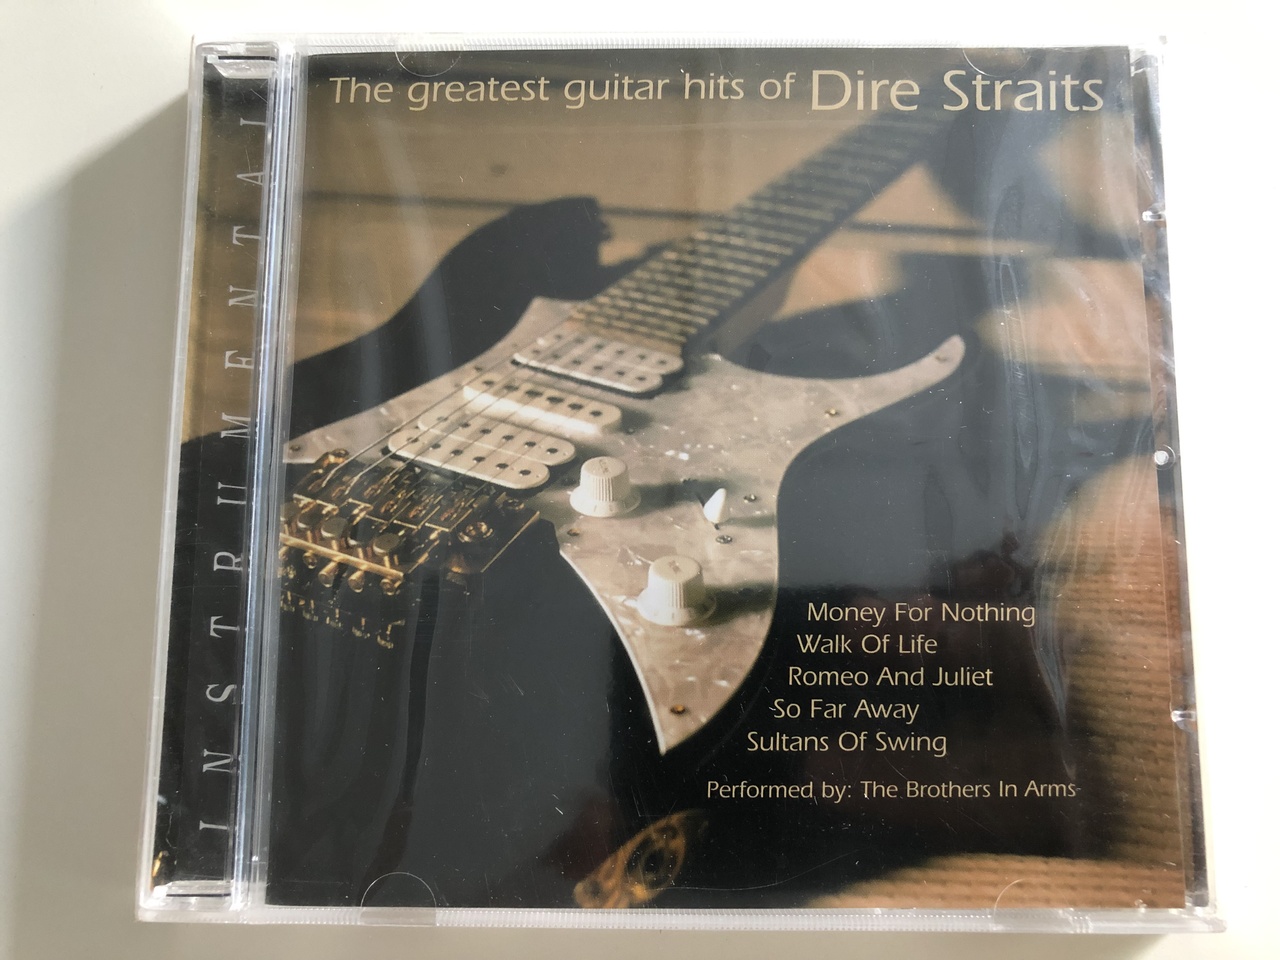 the-greatest-guitar-hits-of-dire-straits-money-for-nothing-walk-of-life-romeo-and-juliet-so-far-away-sultans-of-swing-performed-by-the-brothers-in-arms-instrumental-audio-cd-1998-elap-1-45547.1567011747.1280.1280.jpg